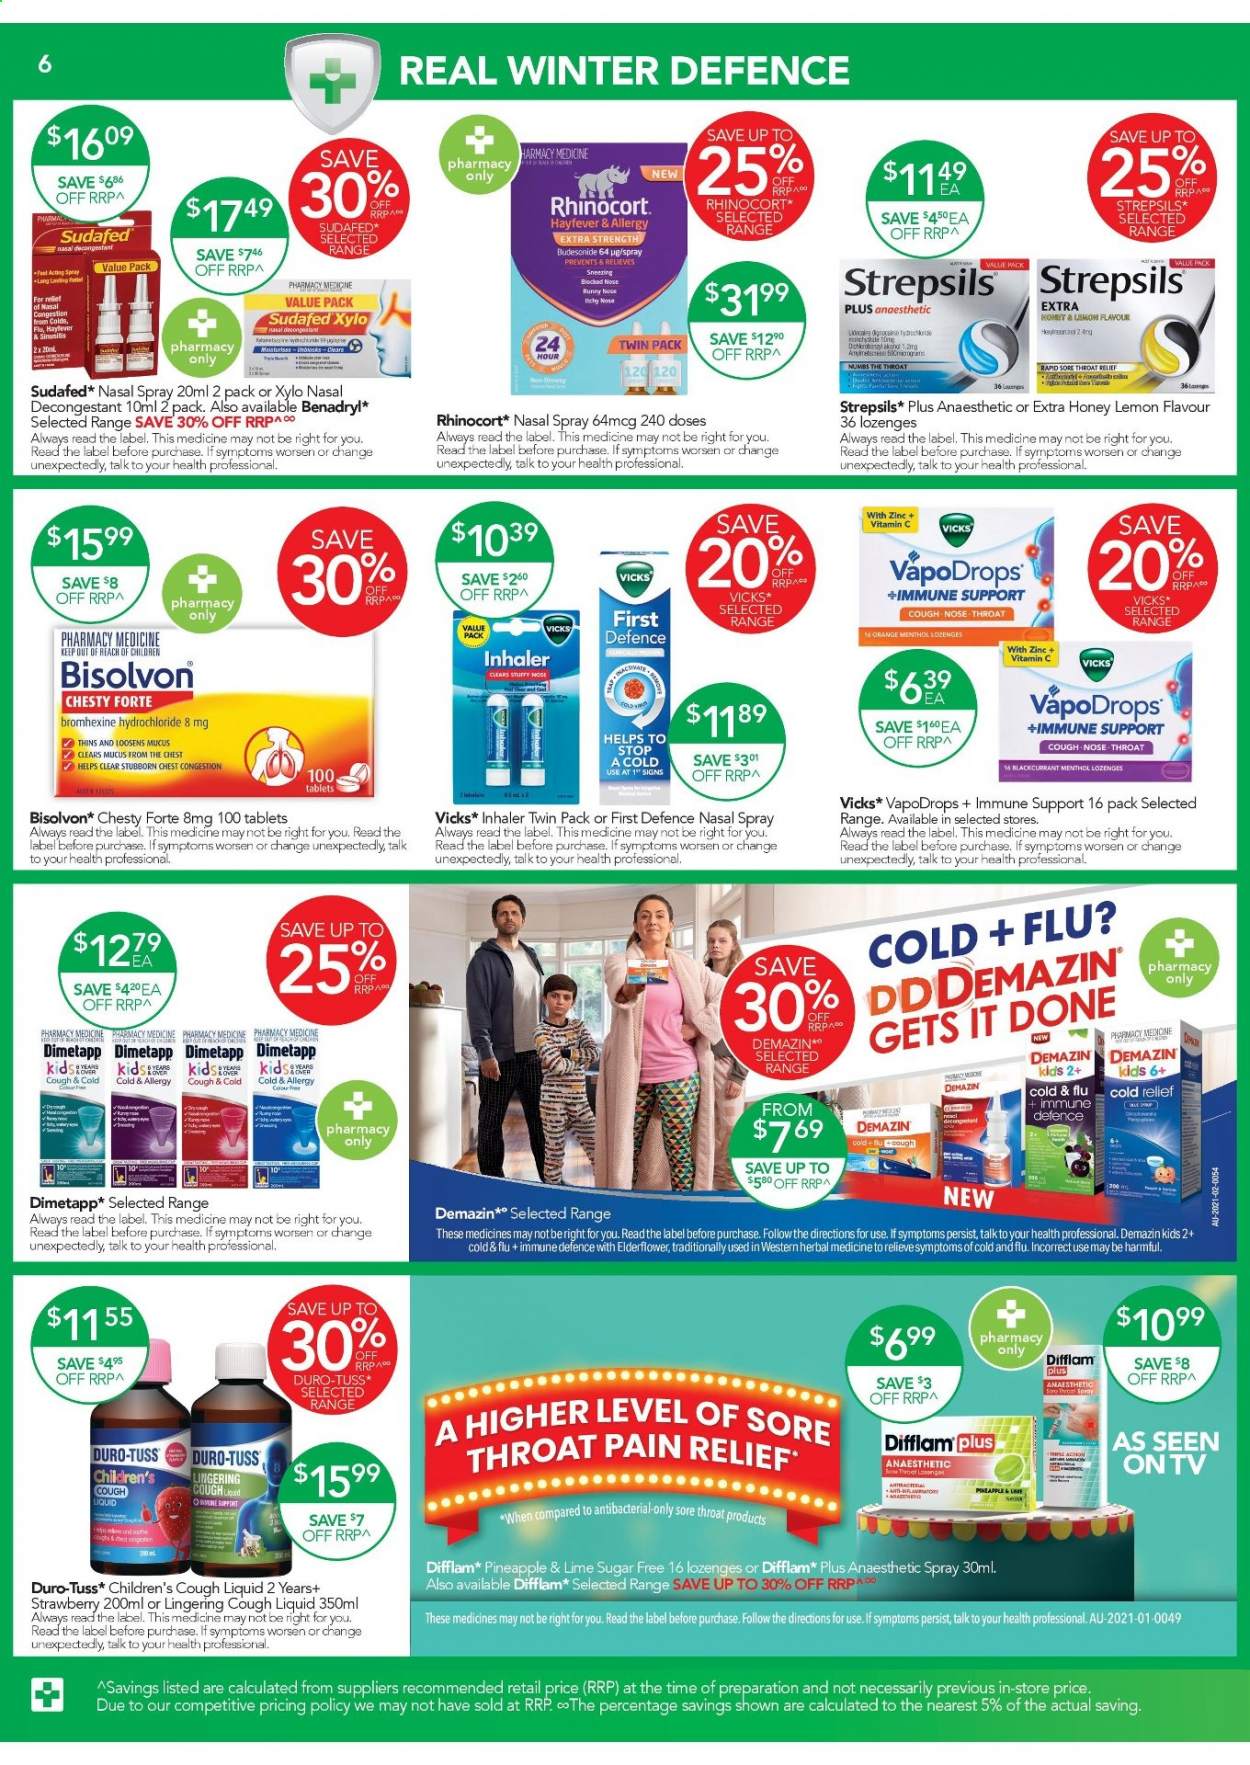 thumbnail - TerryWhite Chemmart Catalogue - 6 May 2021 - 25 May 2021 - Sales products - Vicks, pain relief, Dimetapp, Cold & Flu, Sudafed, vitamin c, Strepsils, nasal spray. Page 6.